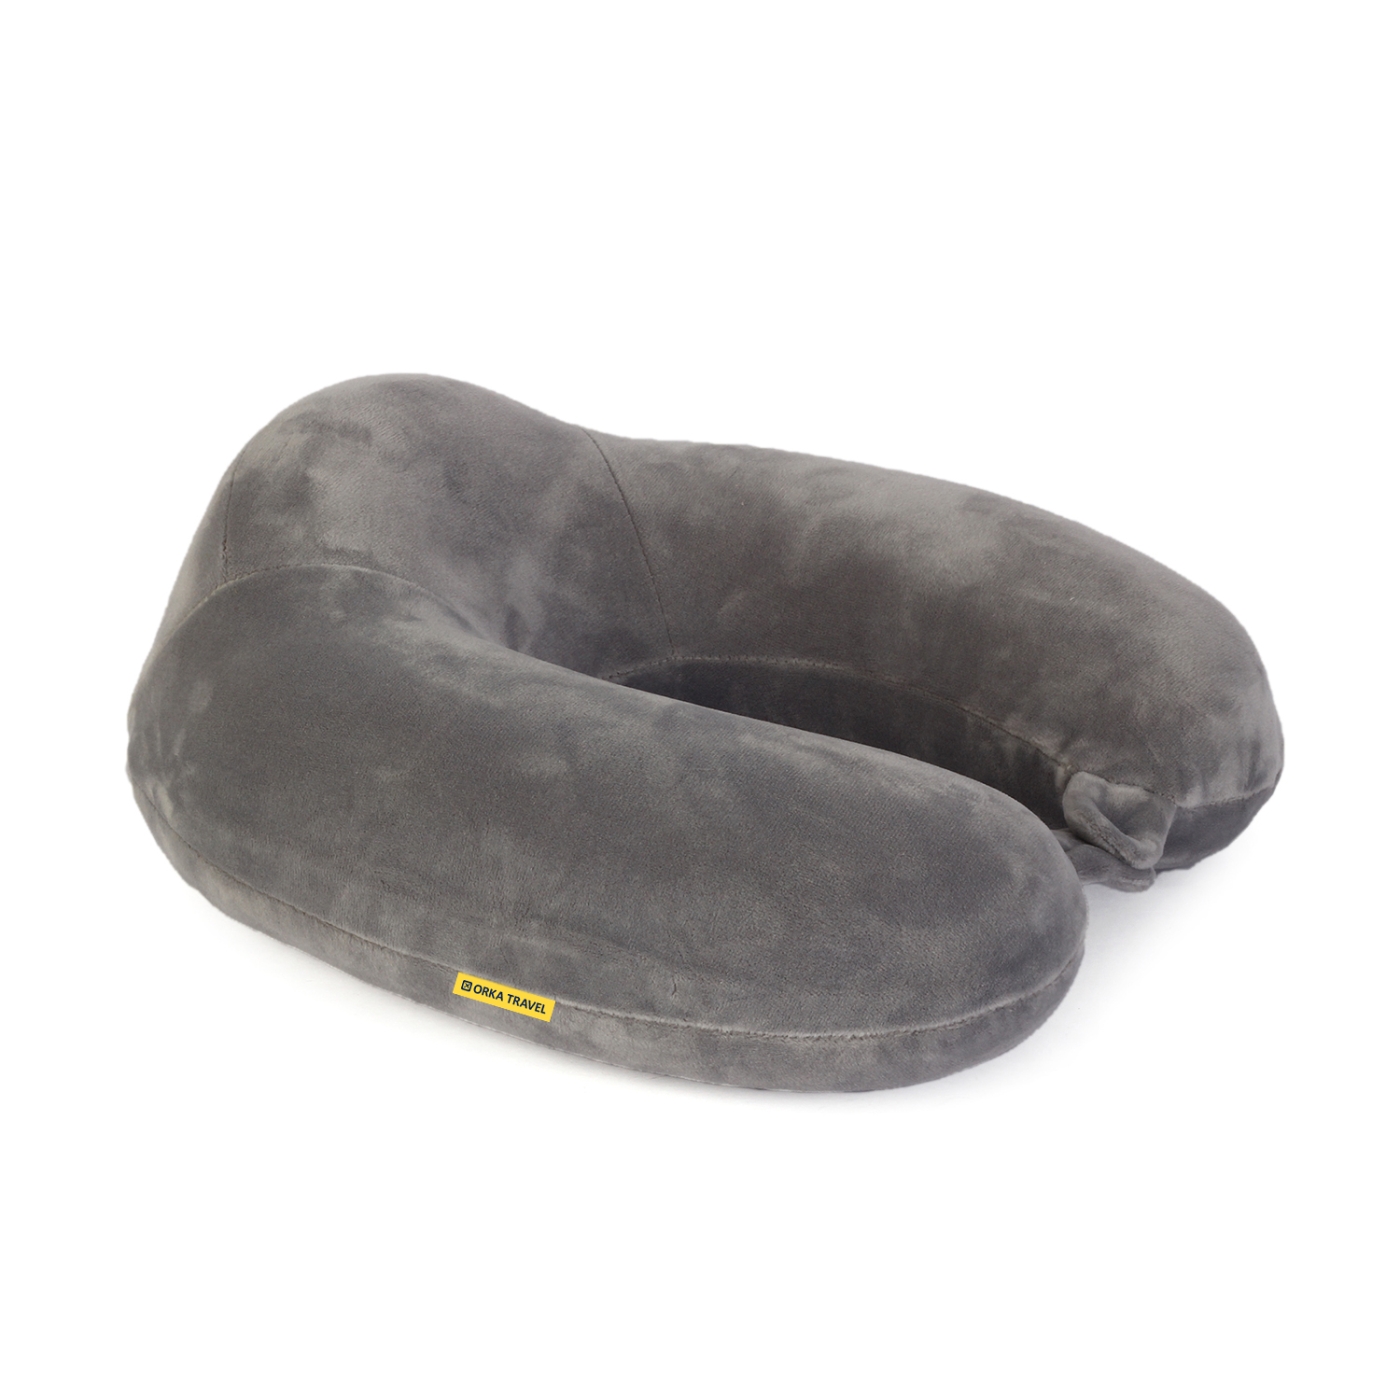 ORKA TRAVEL Solid Special Thermo Sensitive Memory Foam U Shaped Travel Neck Pillow - Grey  